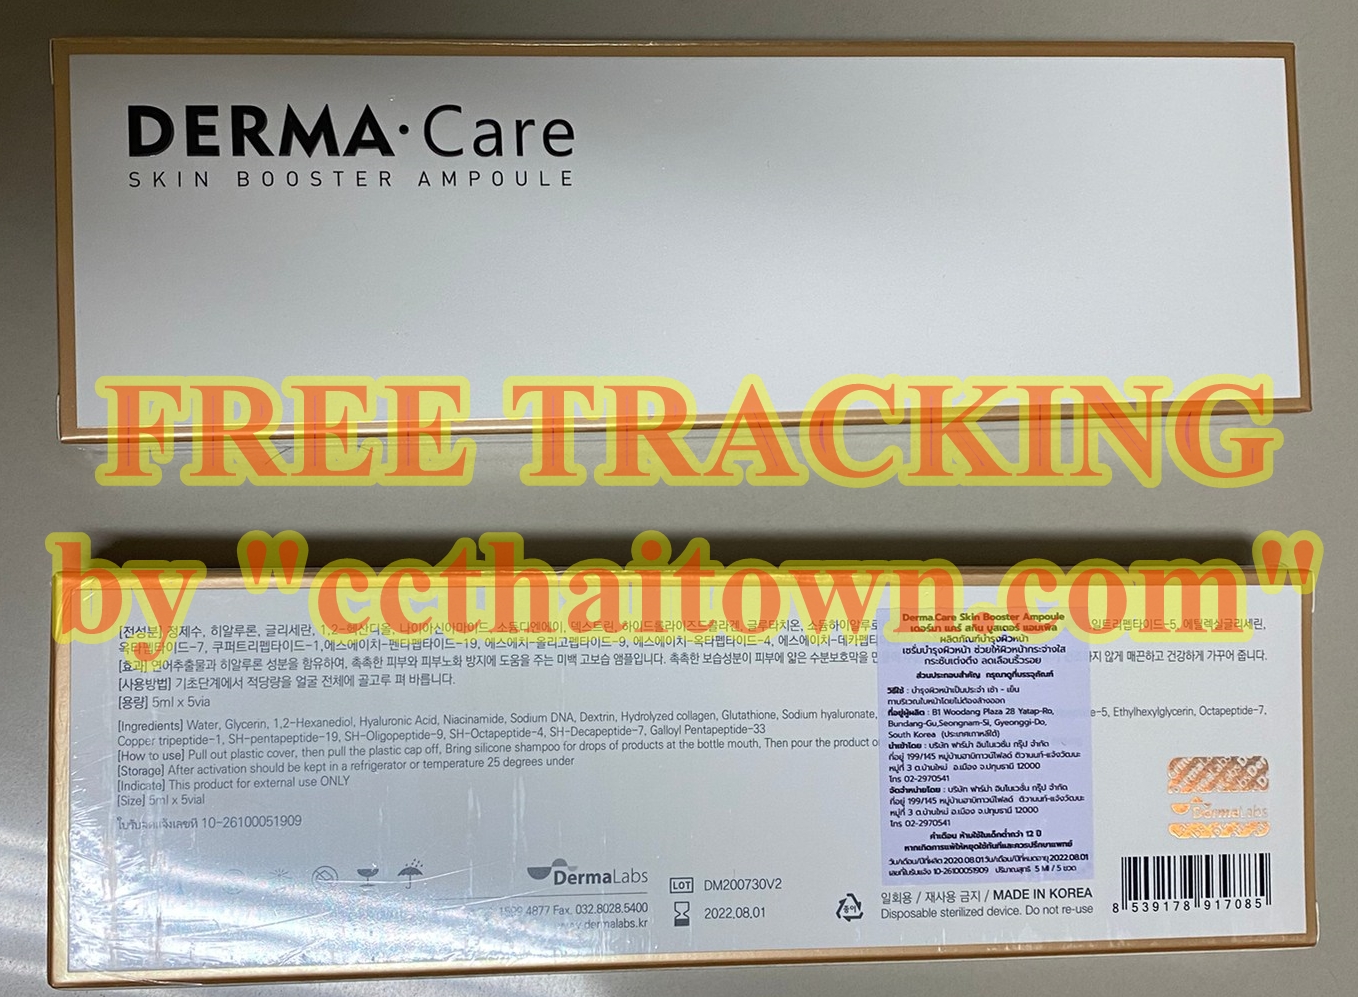 DERMA CARE SKIN BOOSTER AMPOULE (KOREA) 5x5ml SMOOTH & WHITENING SKIN INJECTION by "www.ccthaitown.com"